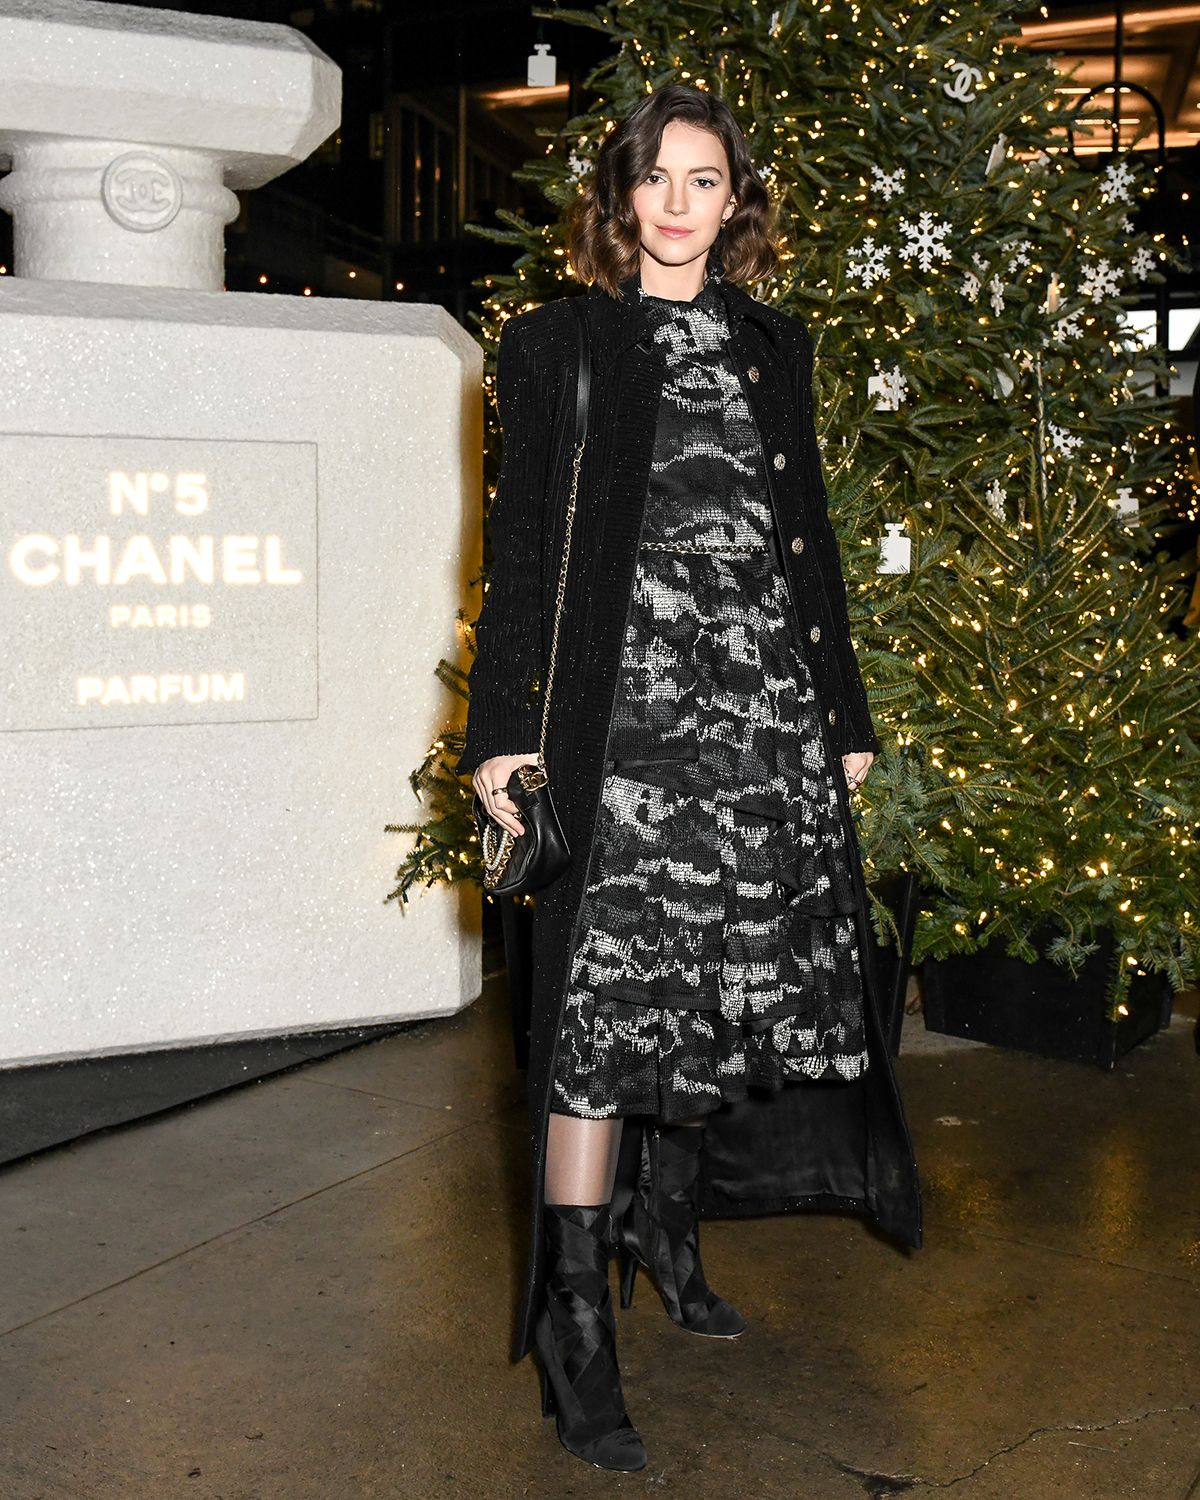 Celebrities wearing CHANEL at the CHANEL N°5 in the Snow Opening